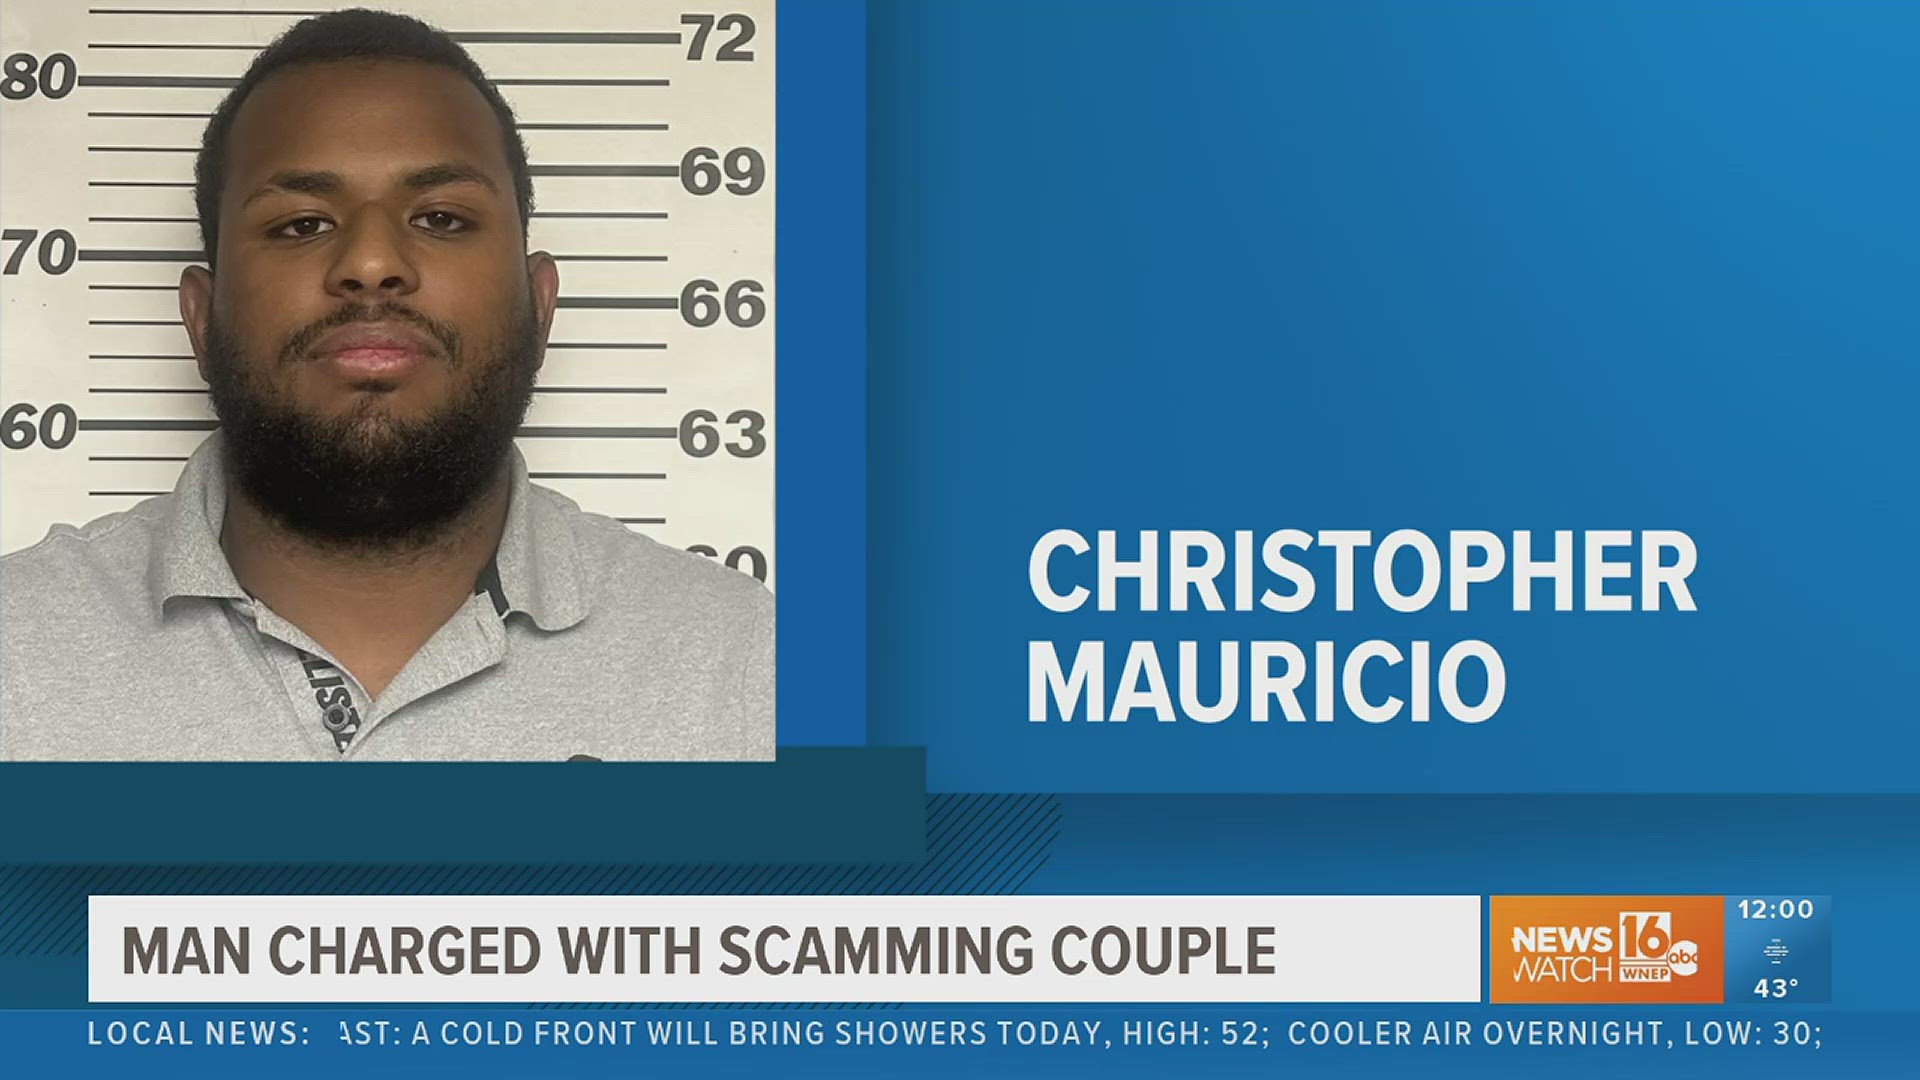 A man is facing charges in Luzerne County for scamming an elderly couple out of thousands of dollars.